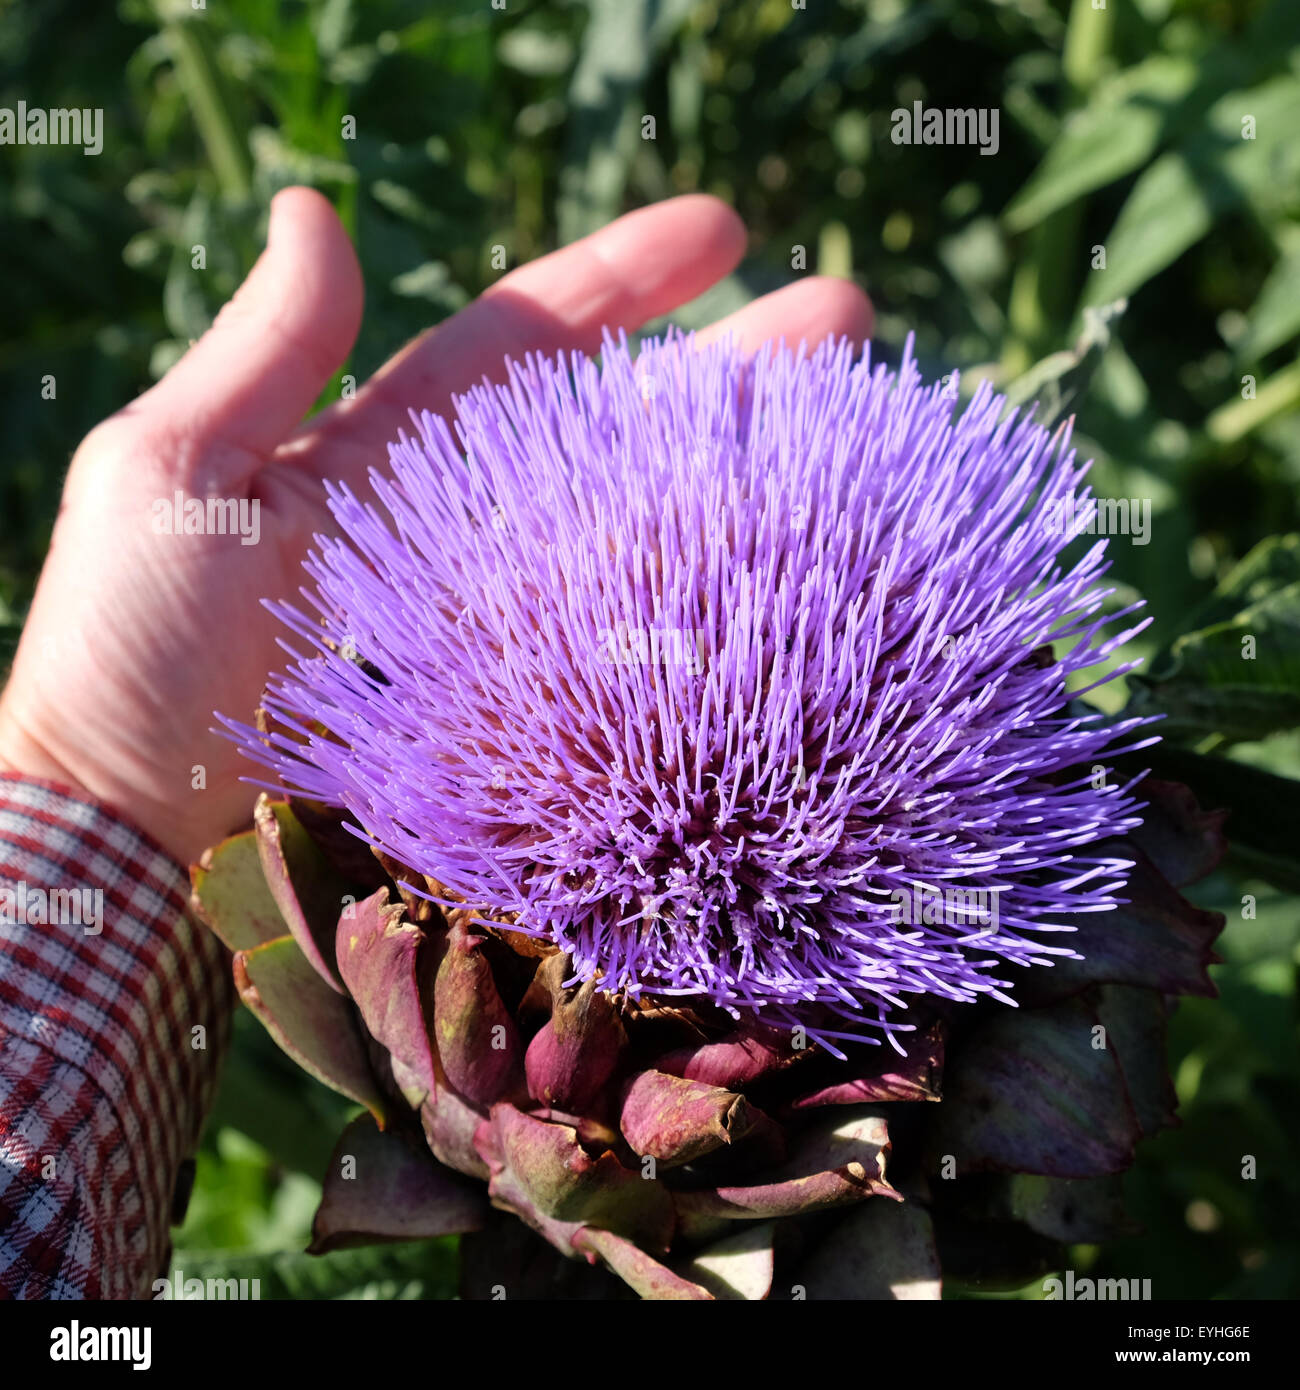 Cardoon flower the large purple flower head with hand for scale  - plant also known as the Artichoke Thistle - July August UK Stock Photo